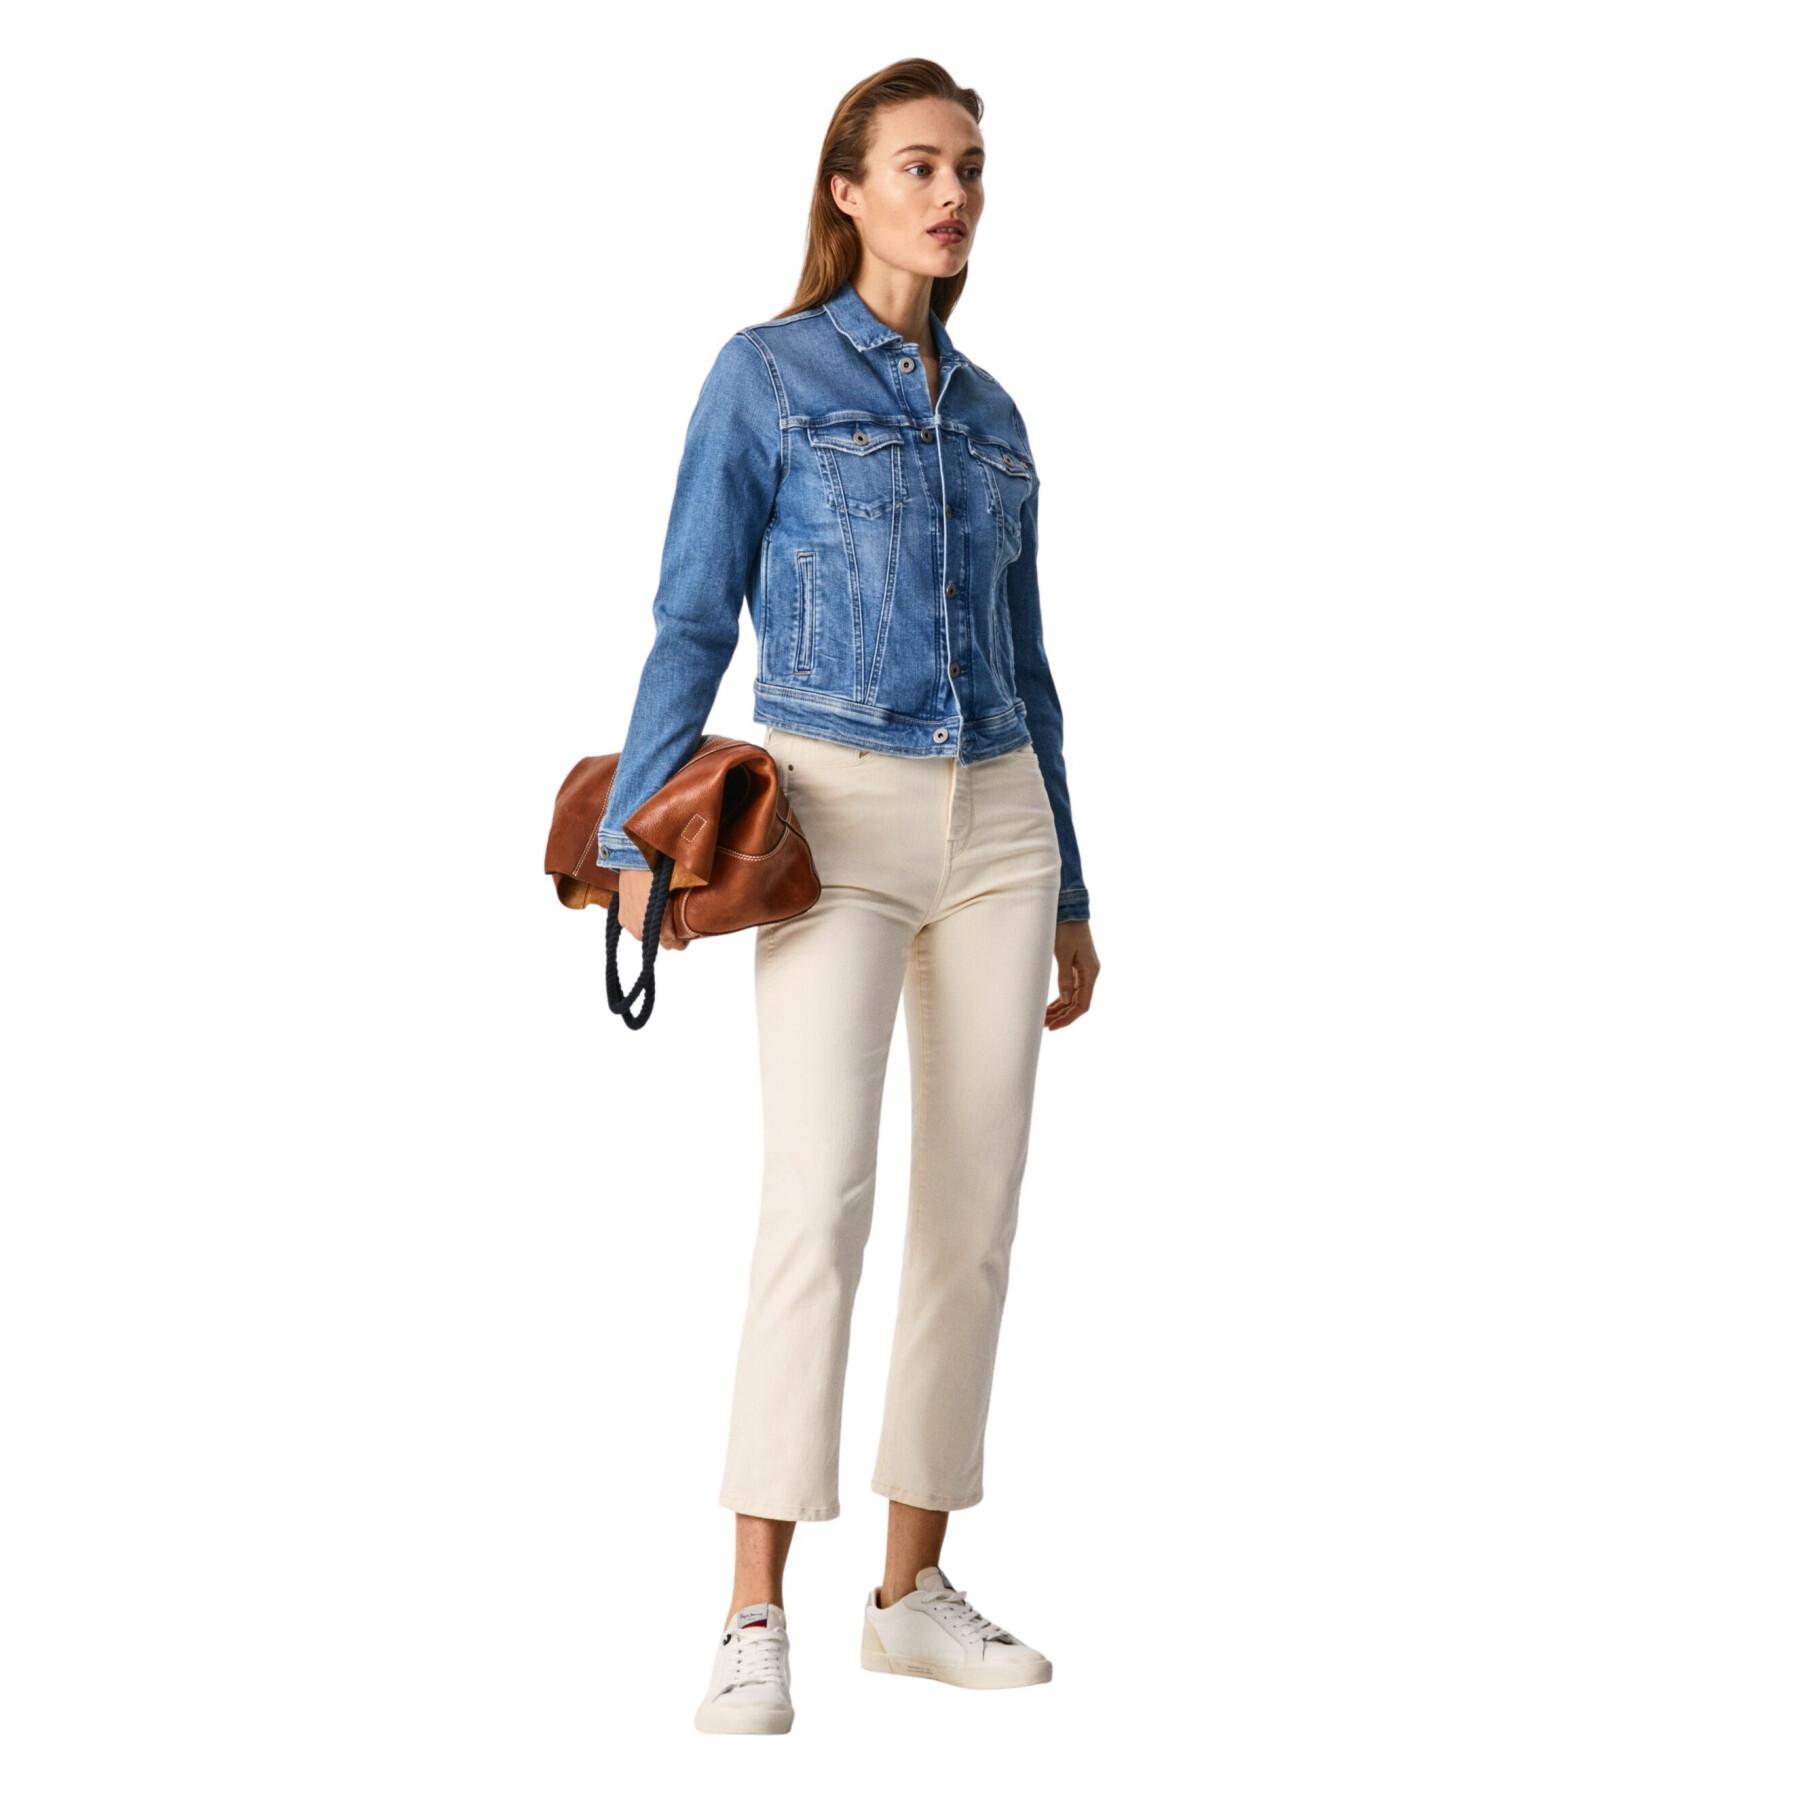 Jeans mujer Pepe Jeans Dion